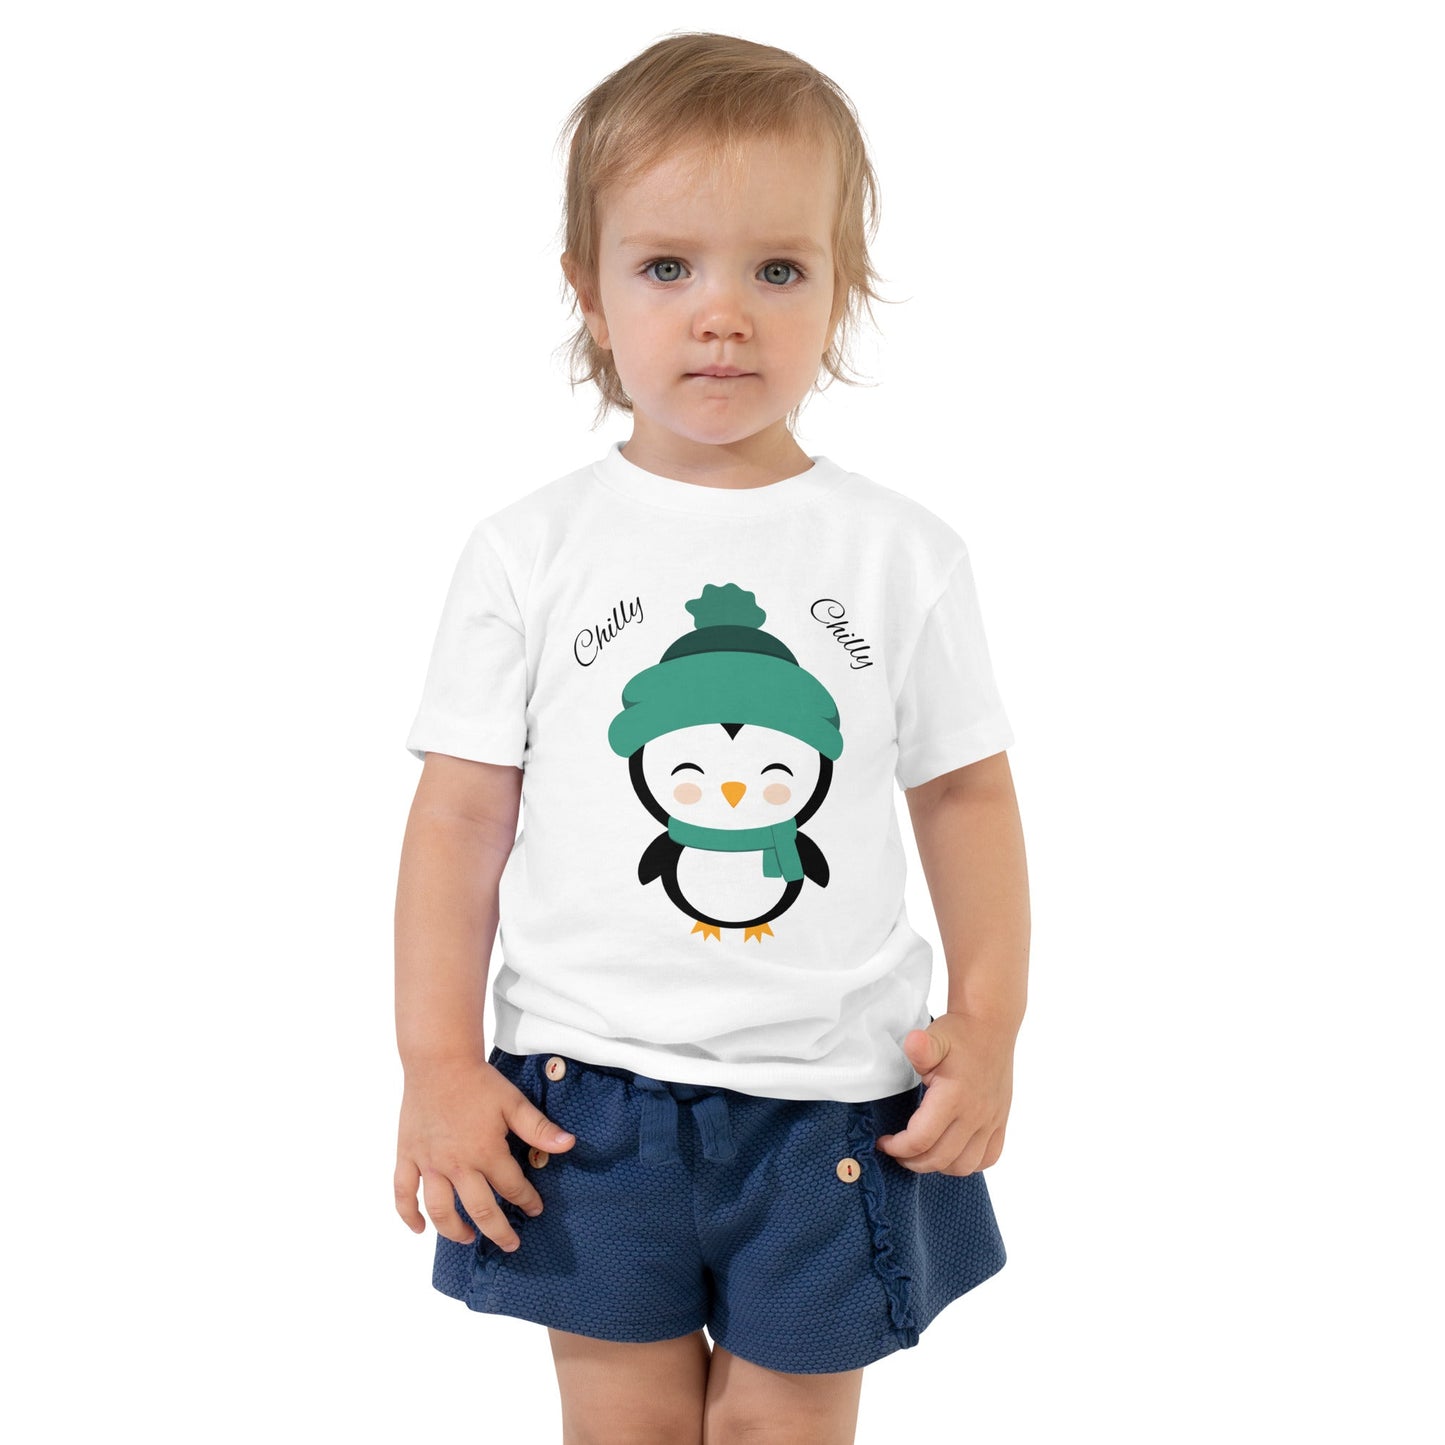 Penguin Graphic Shirts For Kids | Toddler Short Sleeve Tee